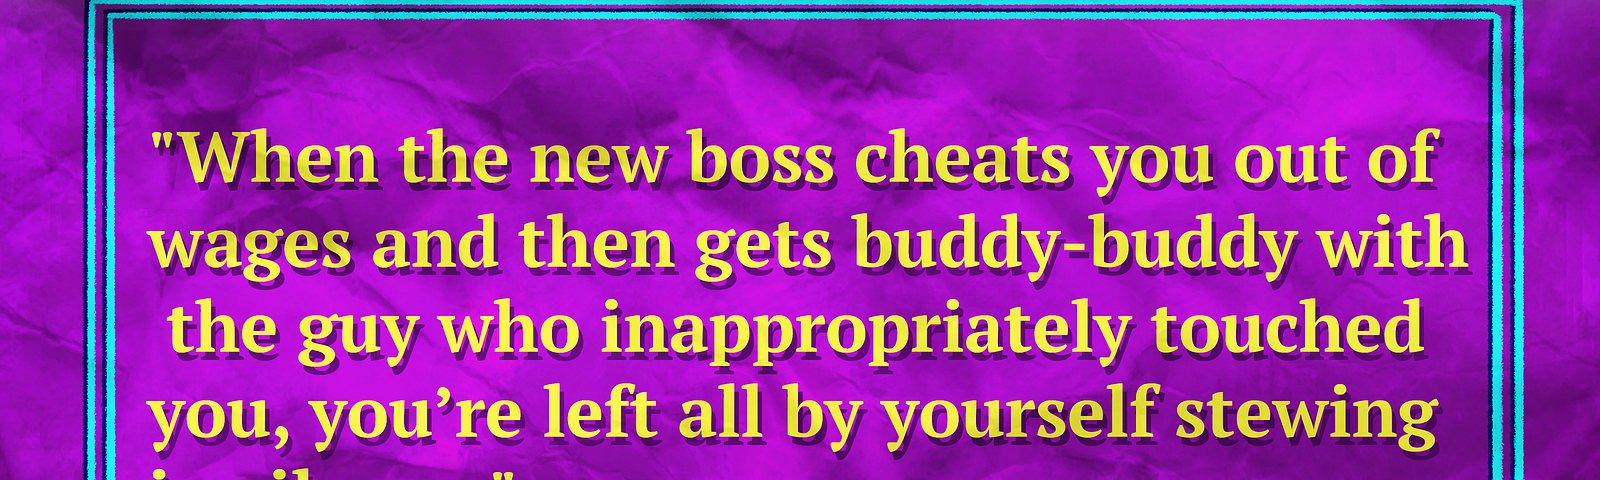 Stylized text reading, “When the new boss cheats you out of wages and then gets buddy-buddy with the guy who inappropriately touched you, you’re left all by yourself stewing in silence.”